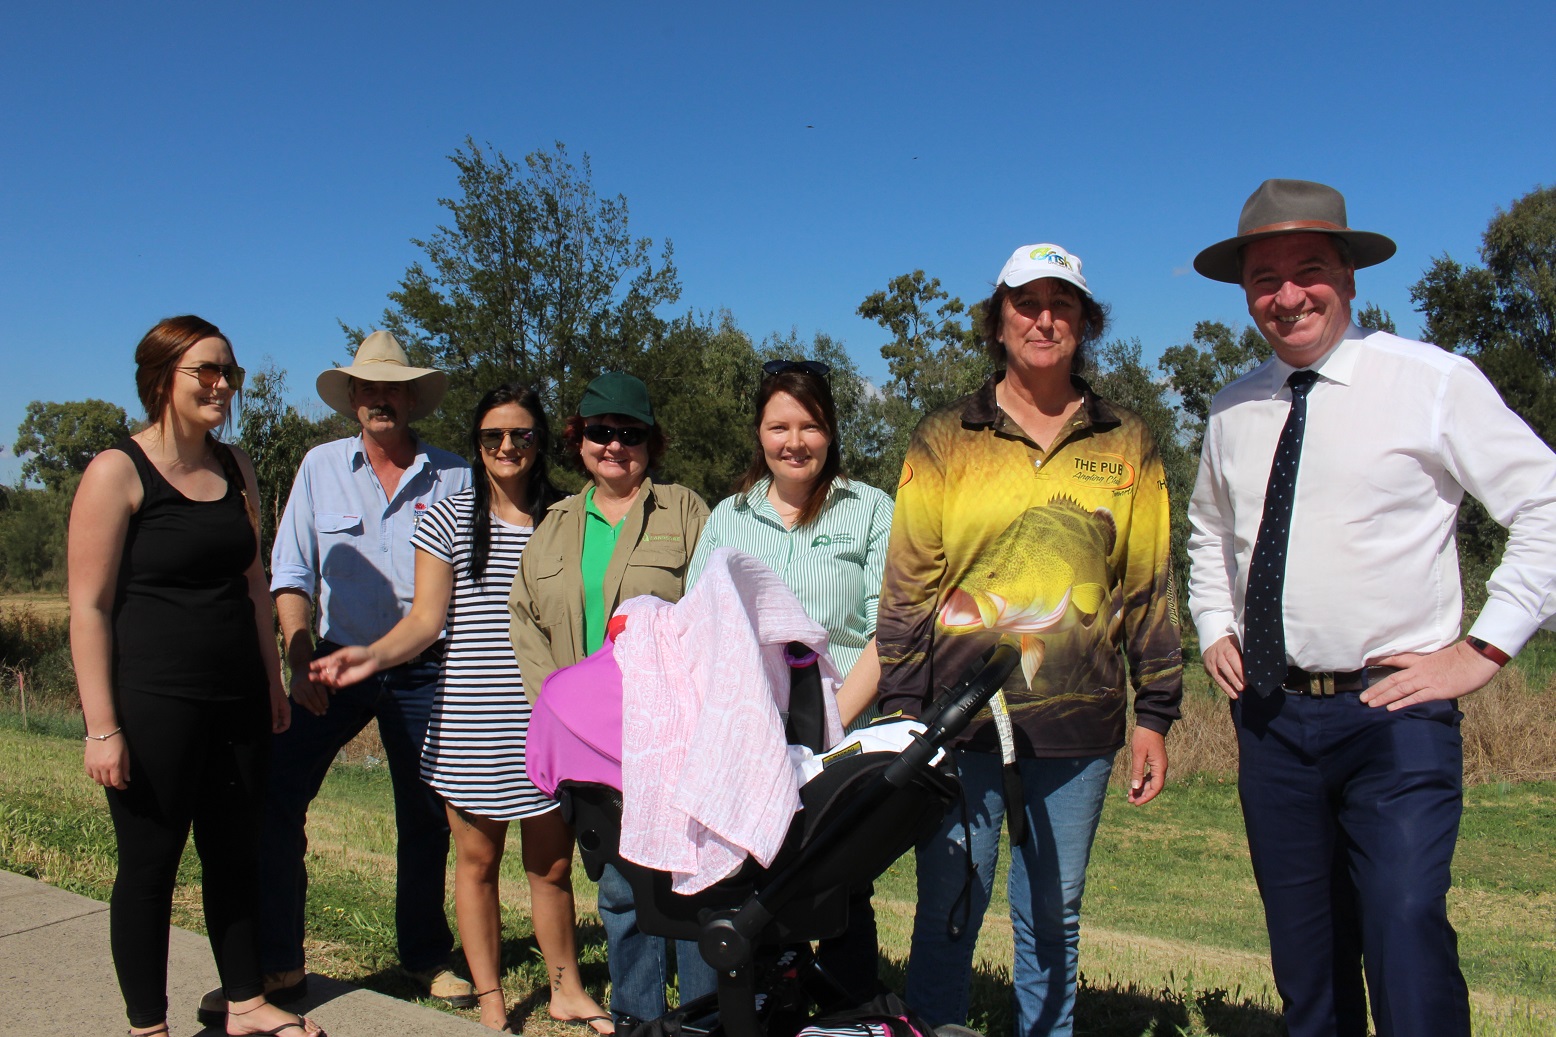 Eliza and baby Ruby, Peter Dawson, Coreena, Julie Clancy, Regional Landcare Facilitator Felicity Chittick, Oz Fish Unlimited’s Anne Michie, with Deputy Prime Minister and Member for New England, Barnaby Joyce at the launch of the Oz Fish on the Peel – Anglers for Habitat project.